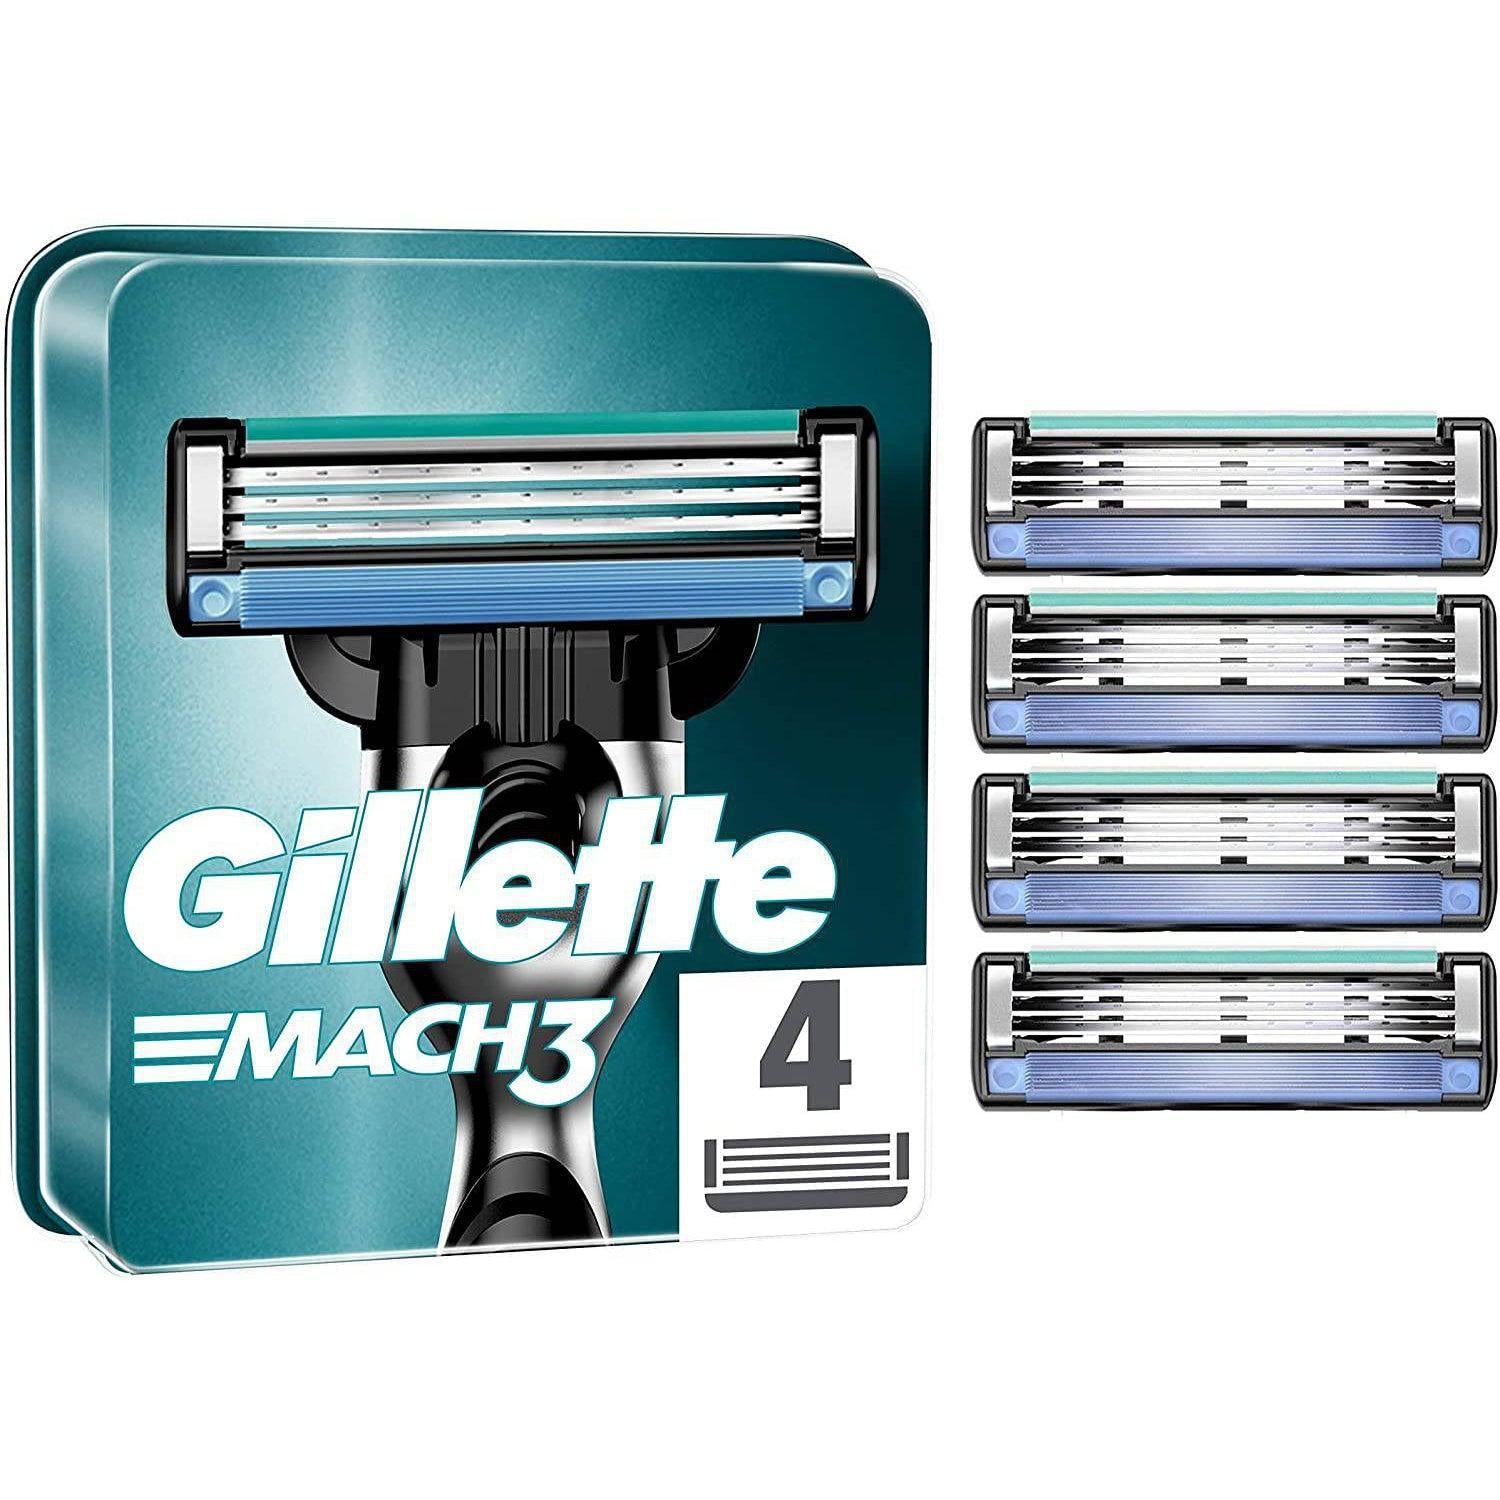 Gillette Mach3 Refill Razor Blades - with Anti-Friction Microfins - 4 Pack - Healthxpress.ie